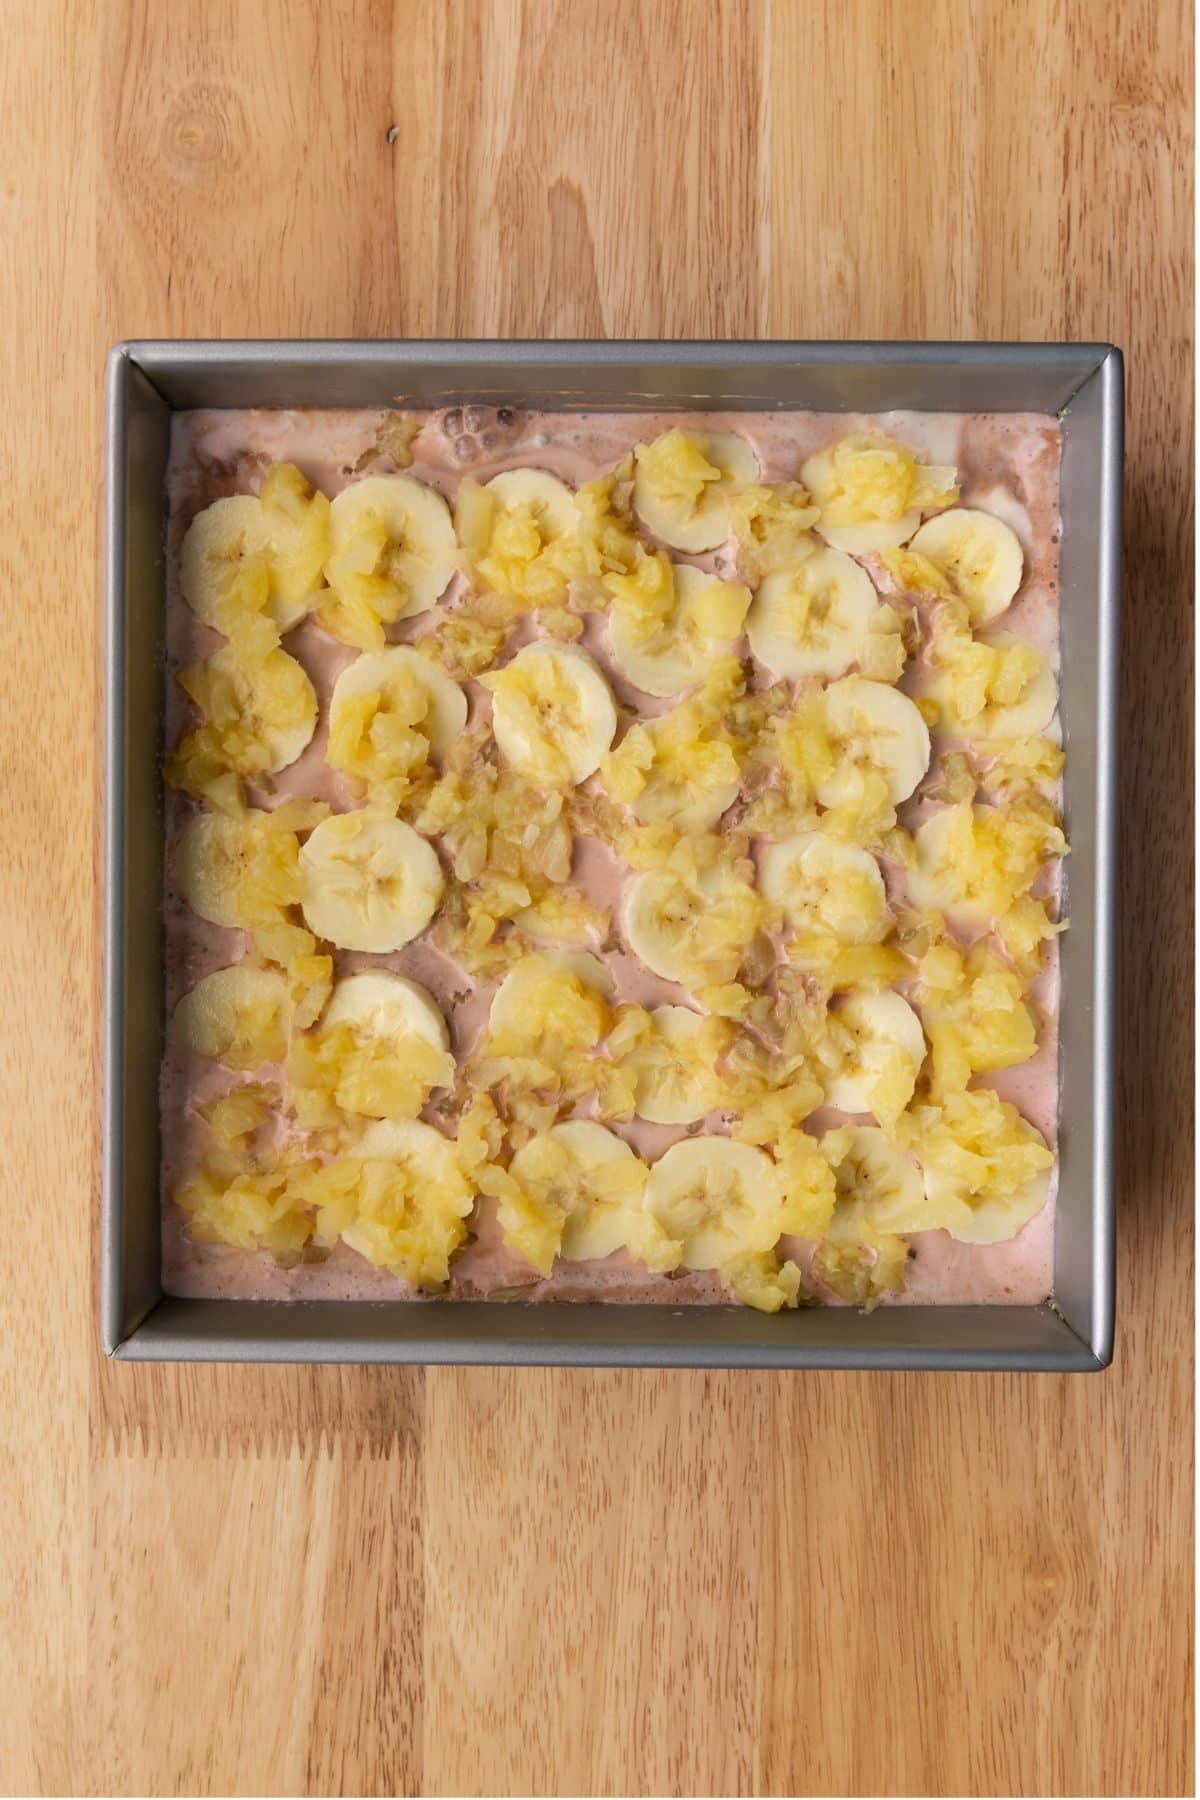 Ice cream layered with banana slices and crushed pineapple.